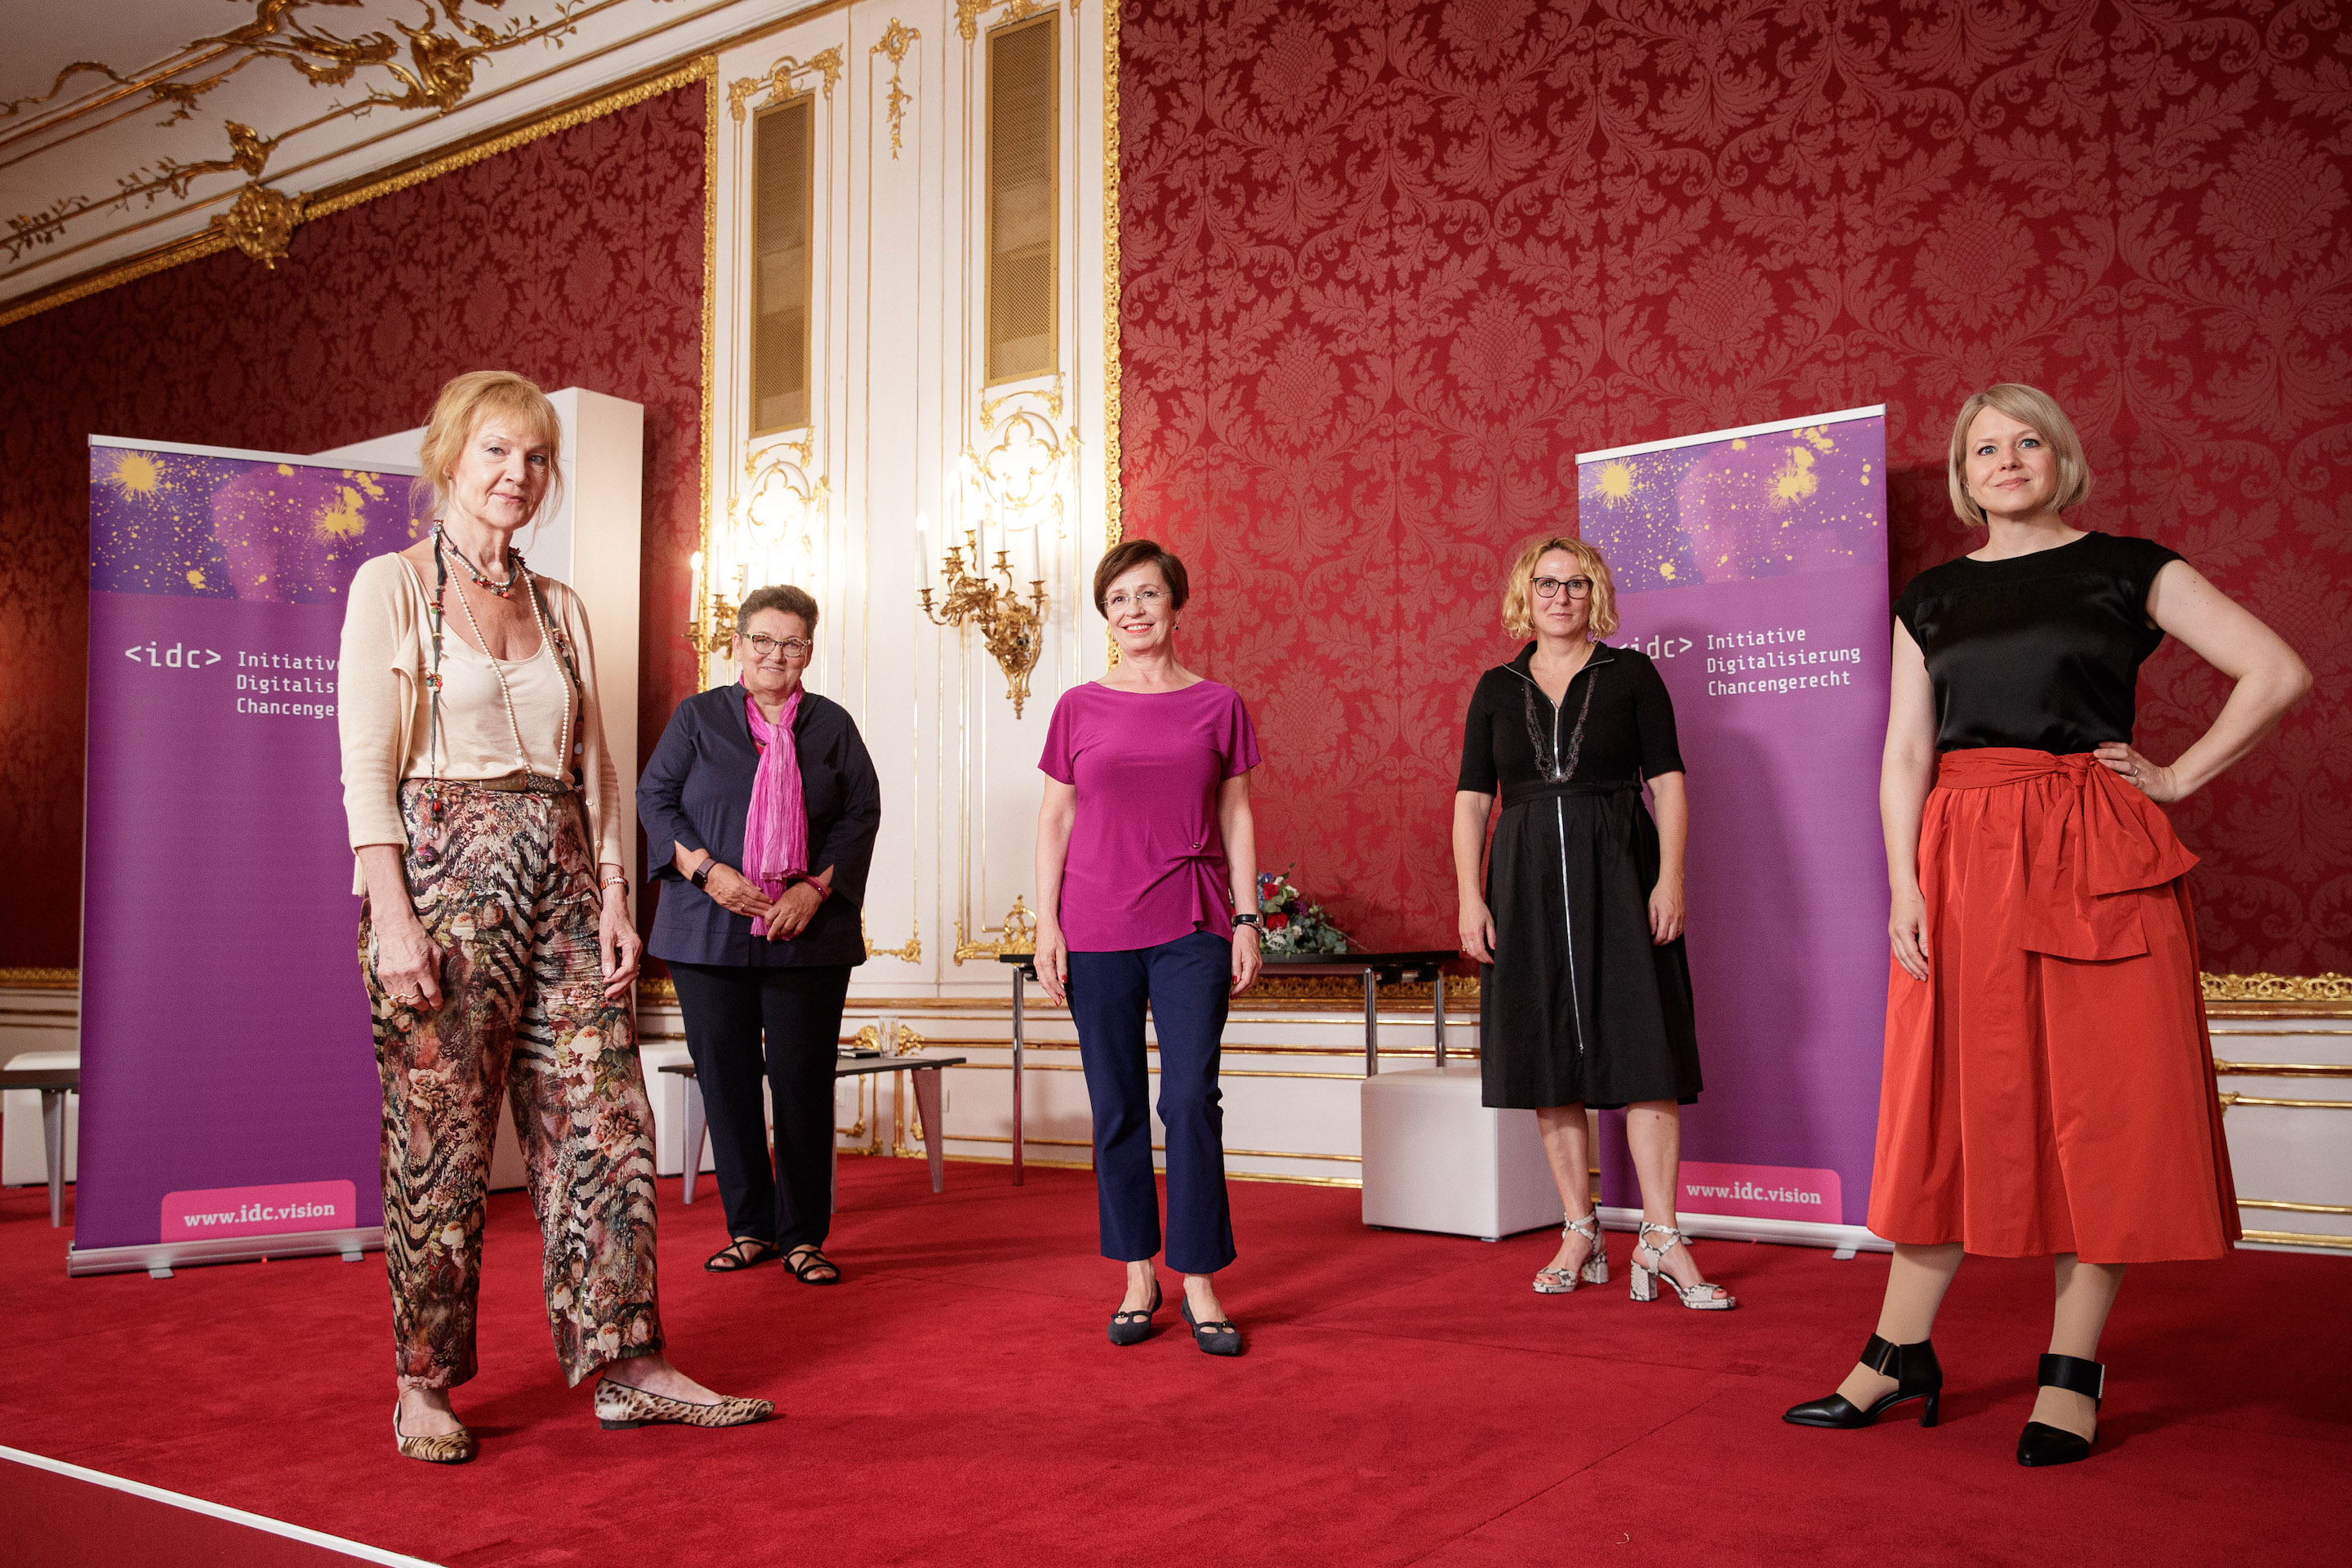 The initiators at the kickoff event in the Hofburg in June 2021. Photo (c) Peter Lechner/HBF